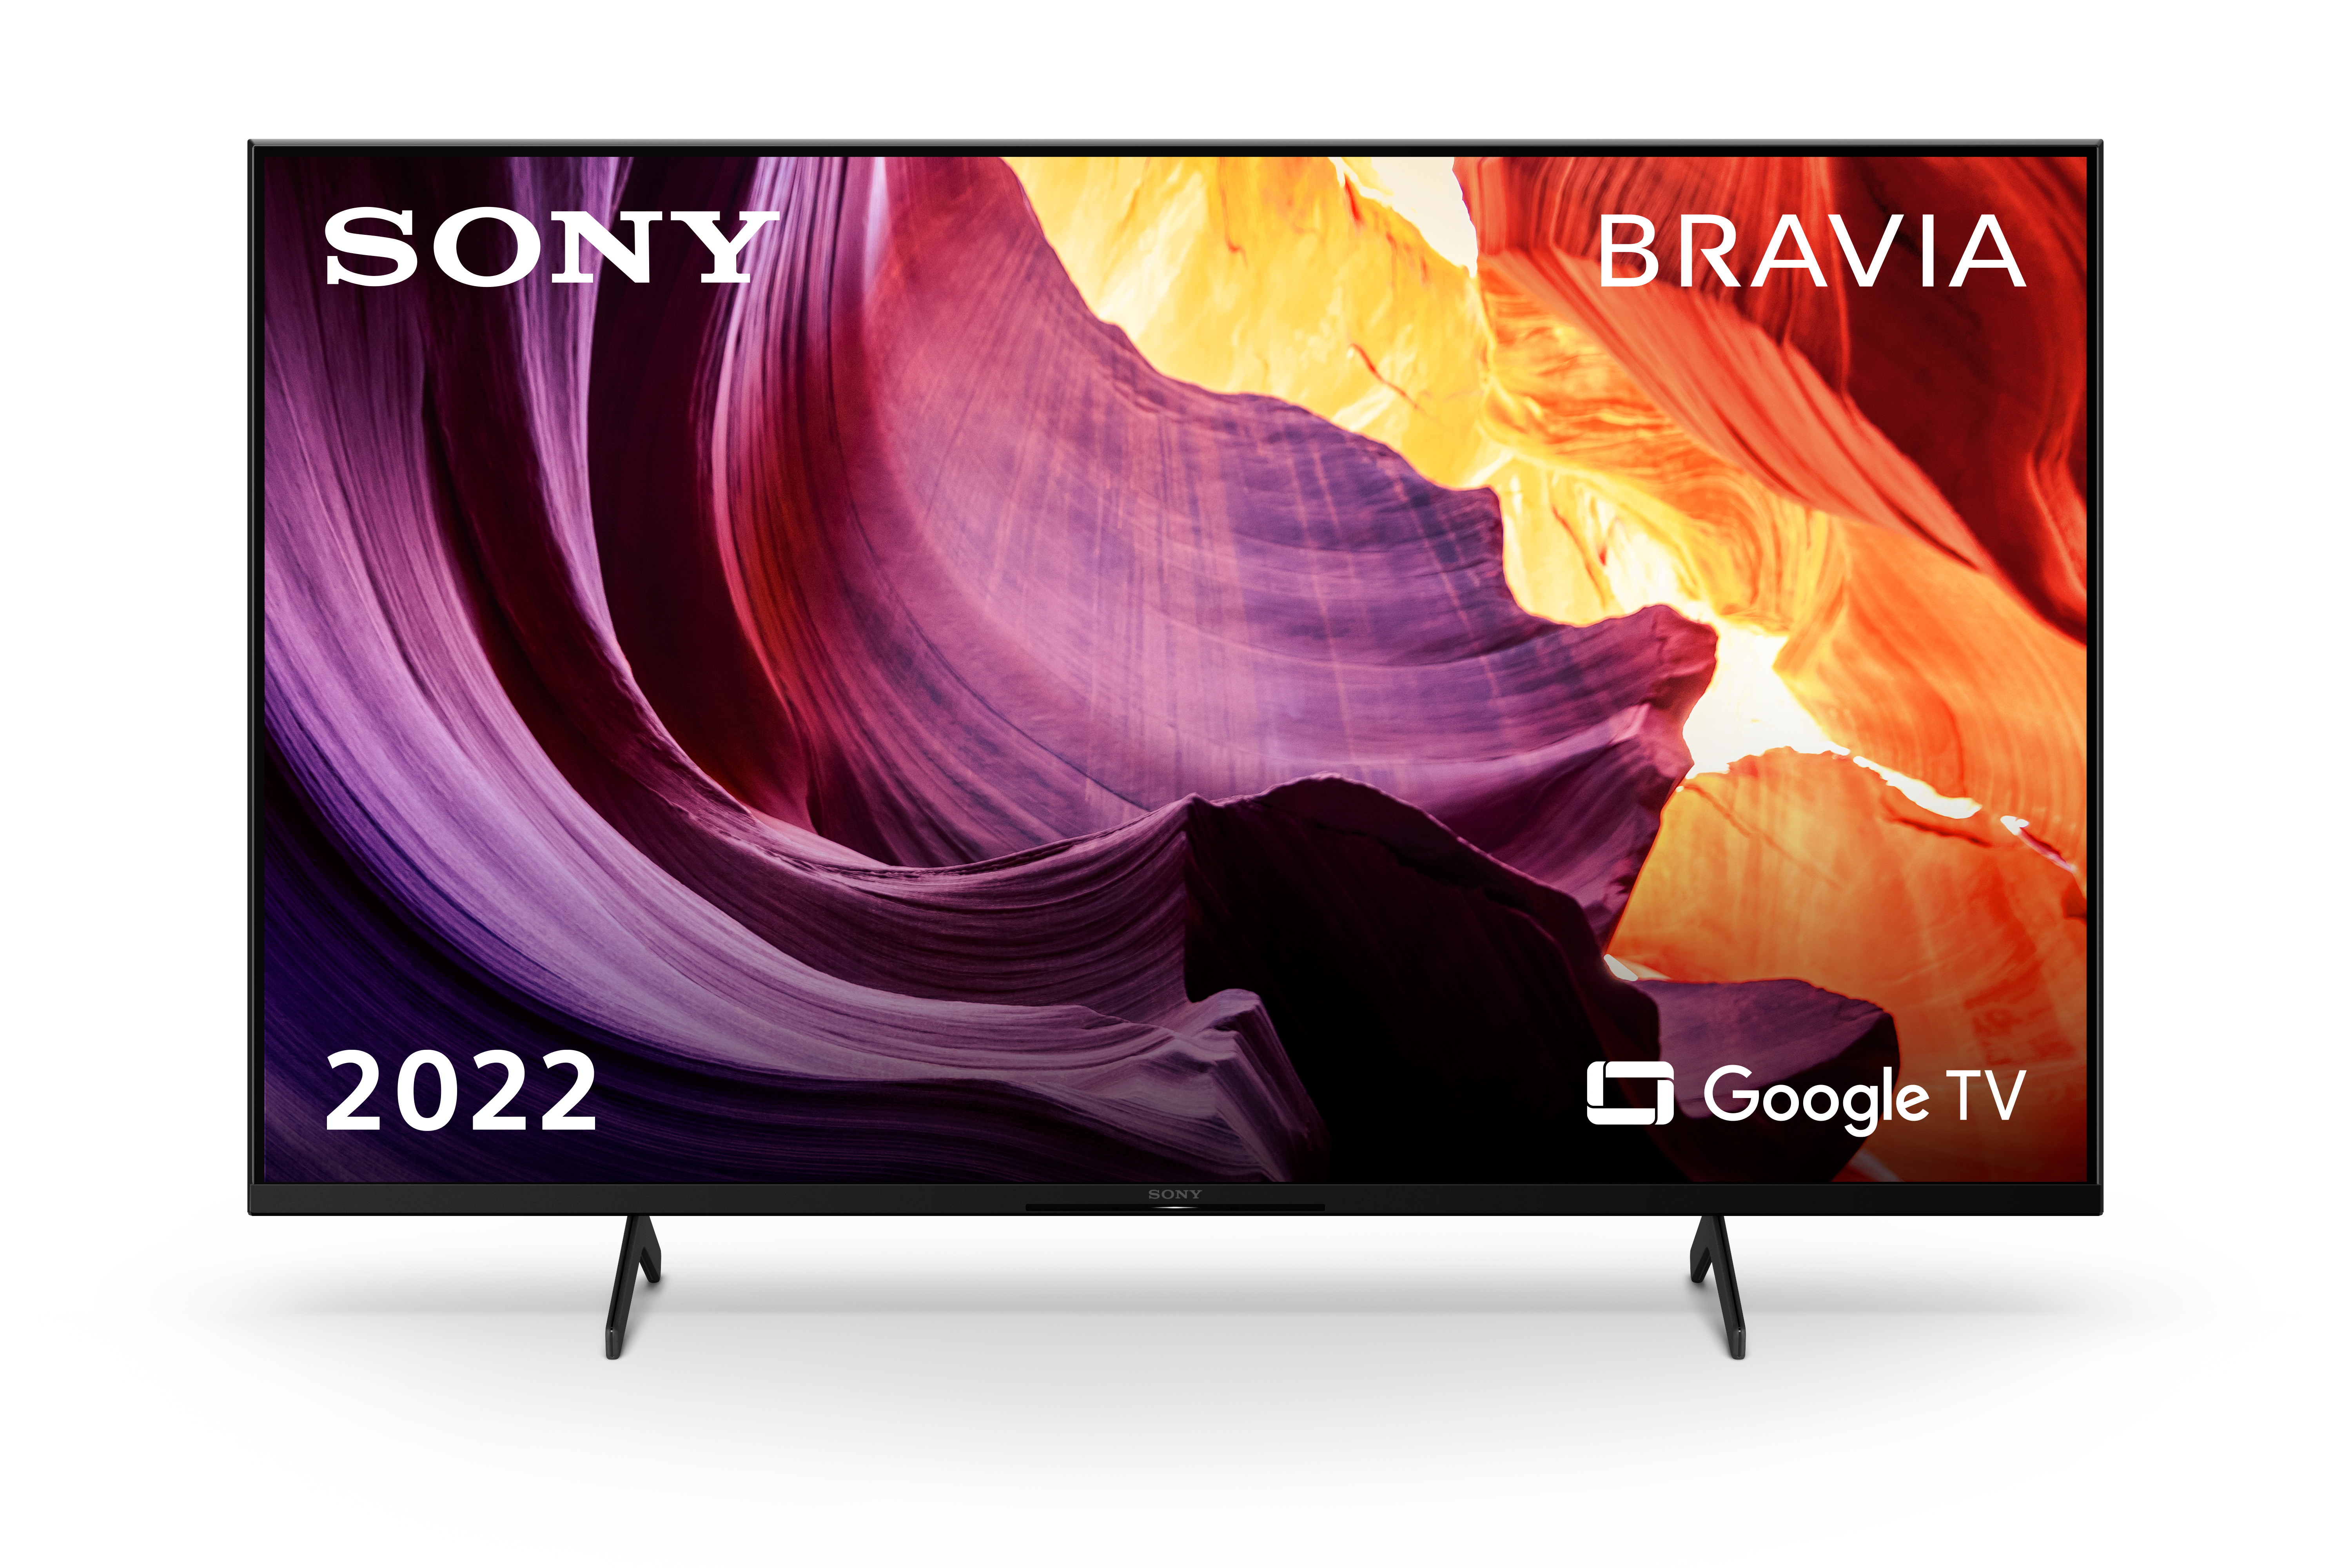 Image of Sony BRAVIA, KD-75X81K, Smart Google TV, 75”, LED, 4K UHD, HDR, Perfect for Playstation, con BRAVIA CORE